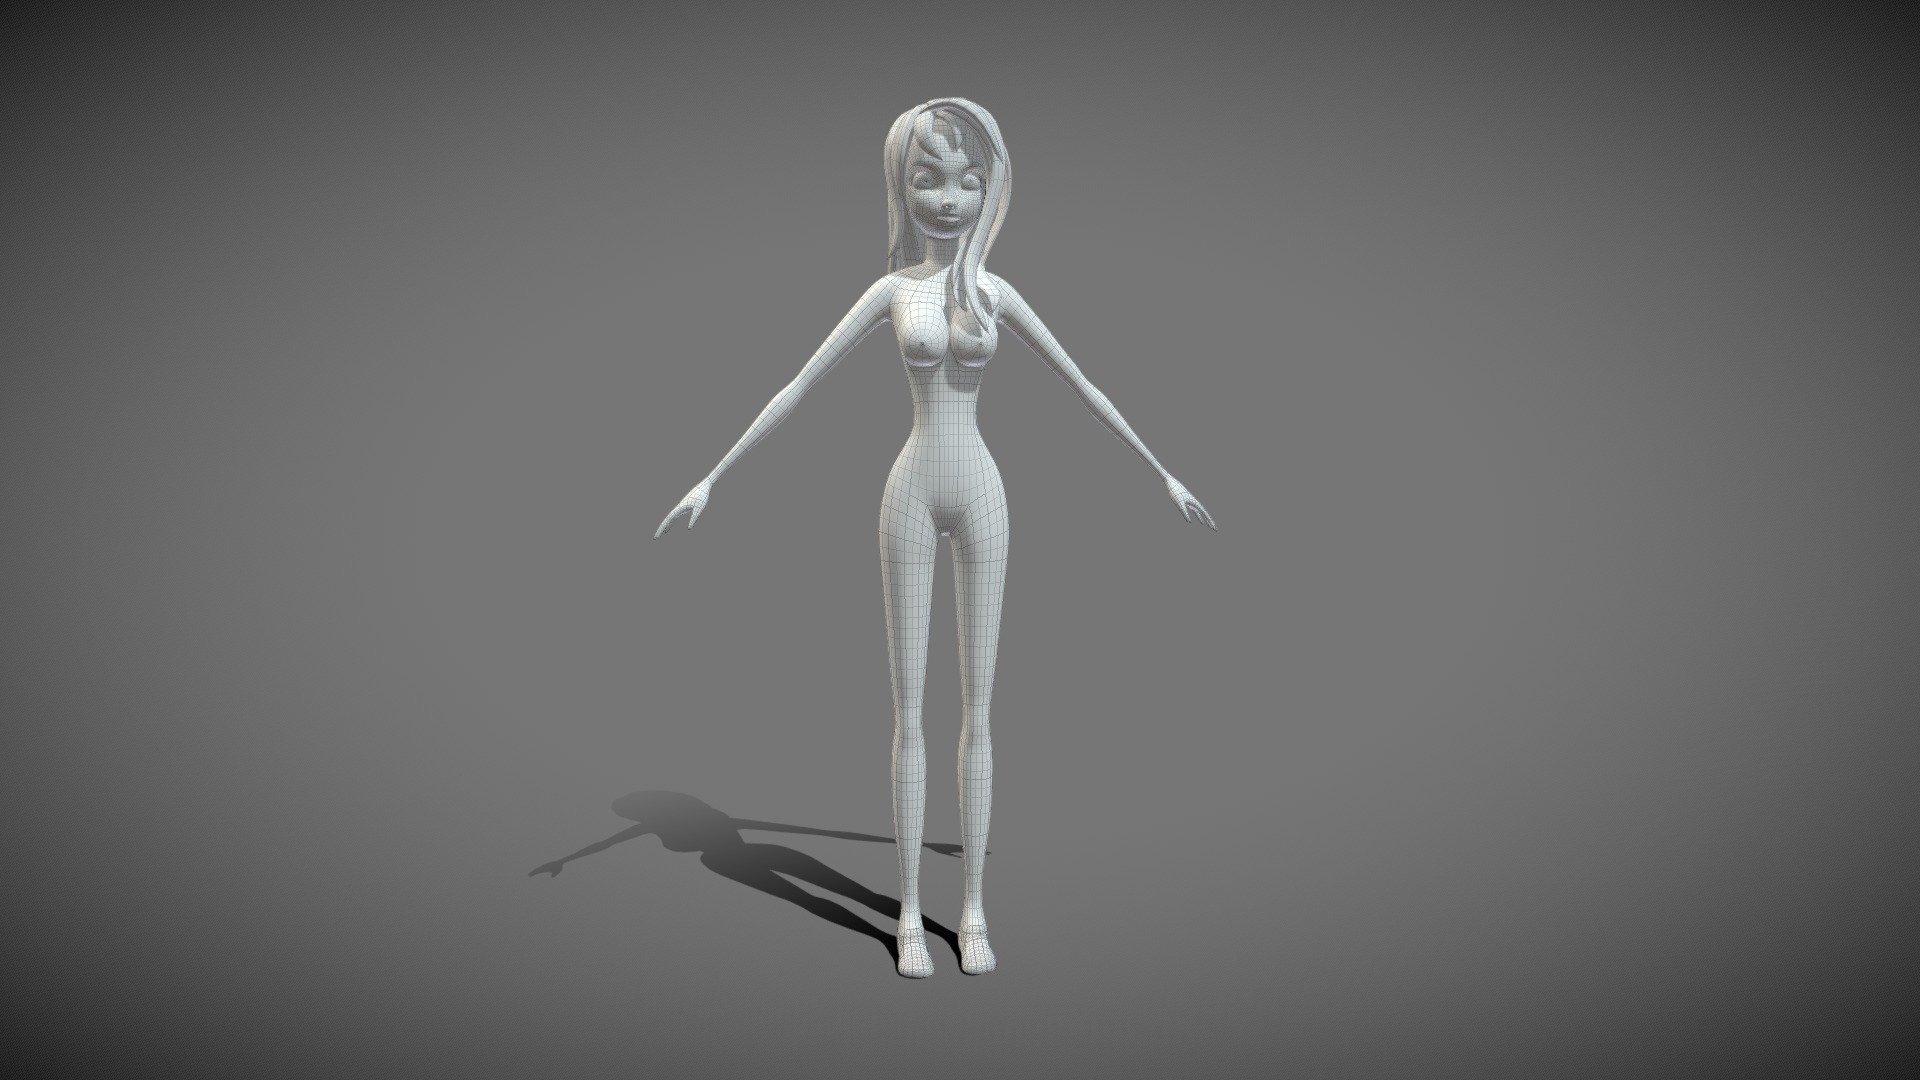 Cartoon Gilrl 3D Model for Study, Editorial. Made with Maya
  So you can all this model Rigging by yourself 3d model